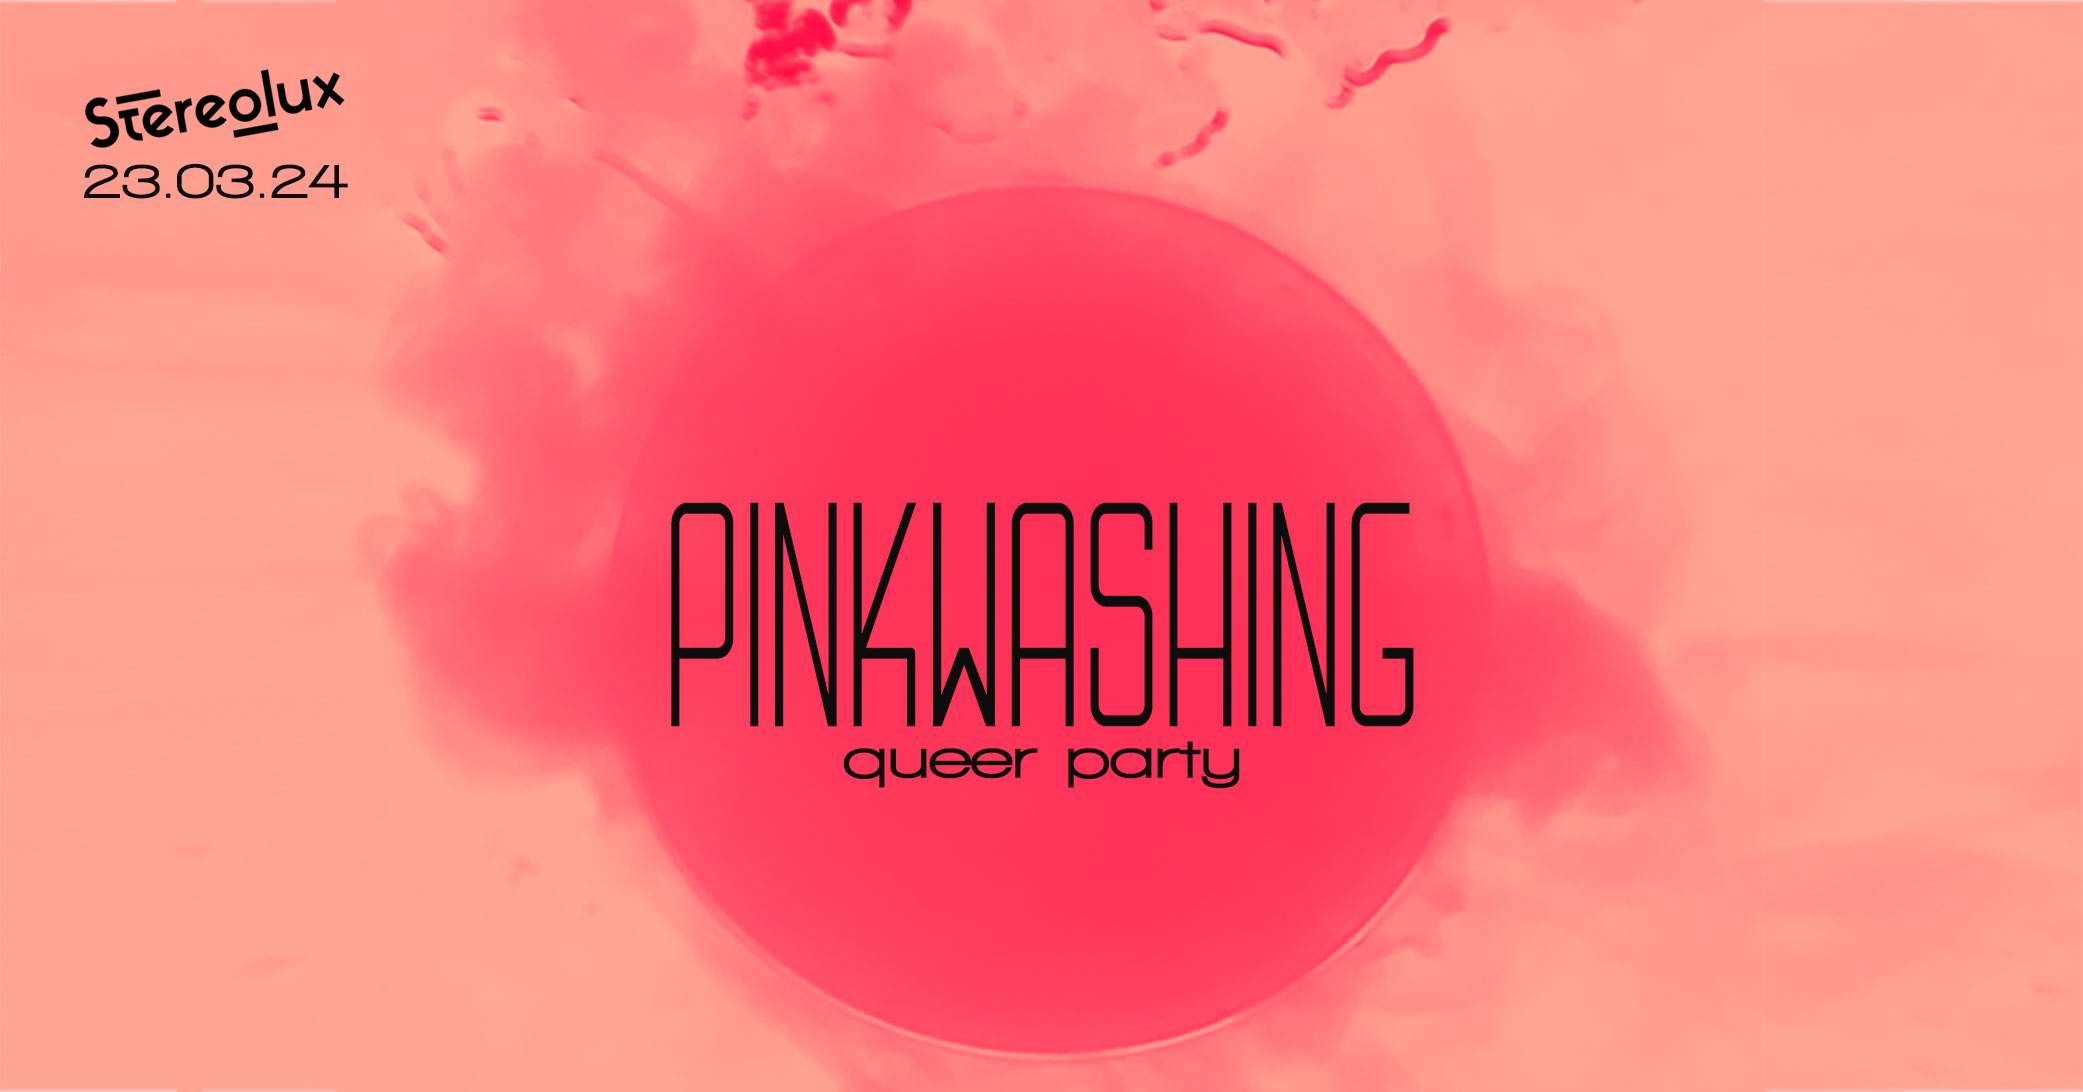 Pinkwashing: Queer party - フライヤー表